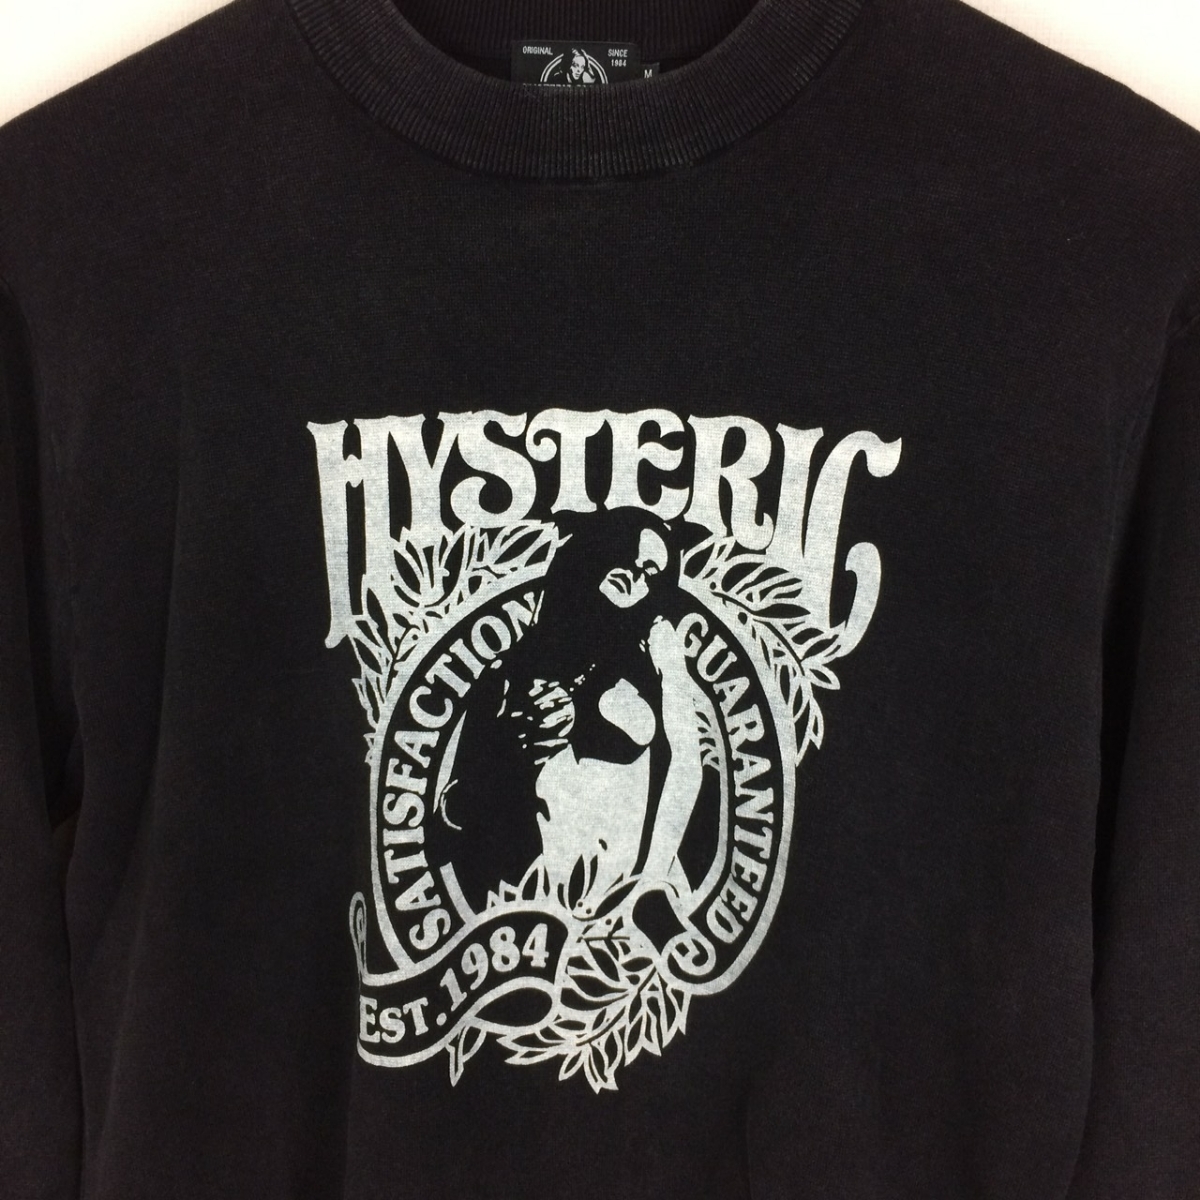 Hysteric glamour japan brand hysteric glamour sex pert punk